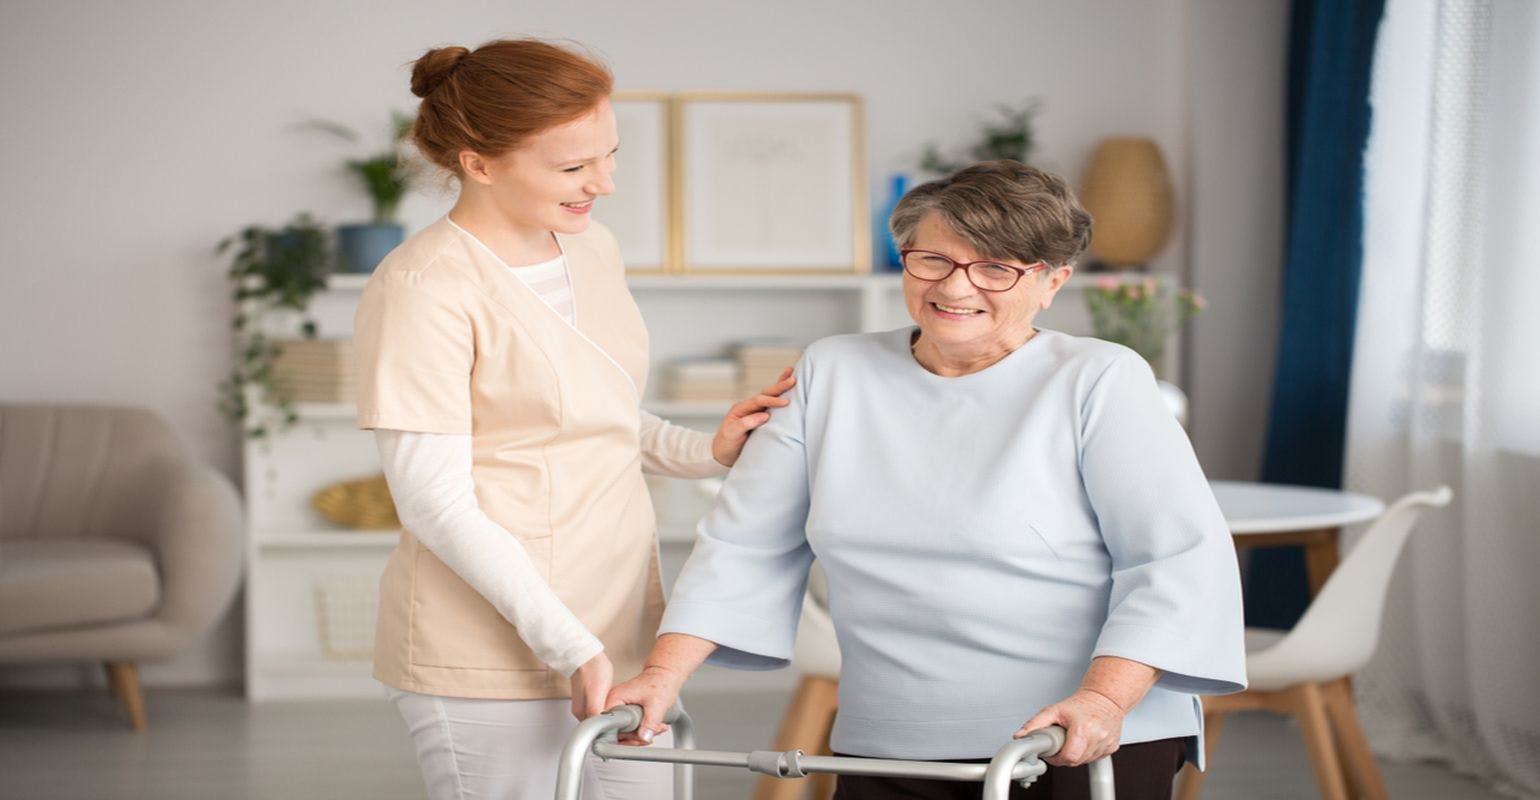 Study Explores Nurses’ Knowledge and Attitudes Toward Infection Control in Home Healthcare